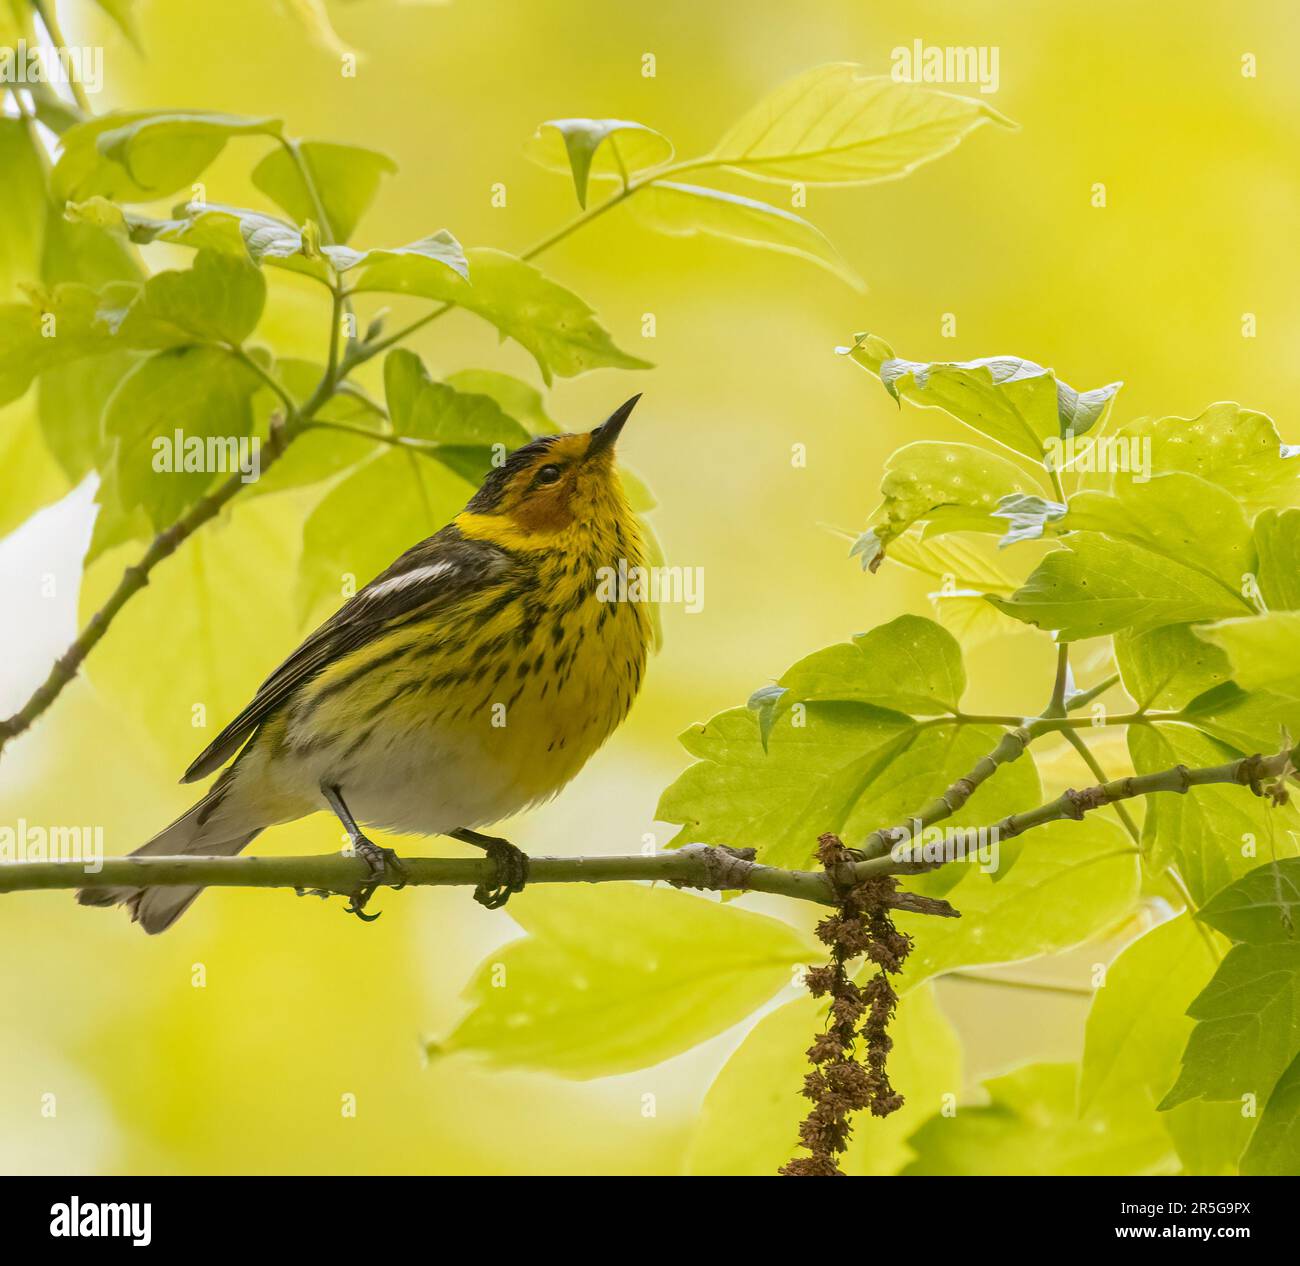 A male Cape May Warbler surrounded by beautiful sunlit yellow and green foliage Stock Photo